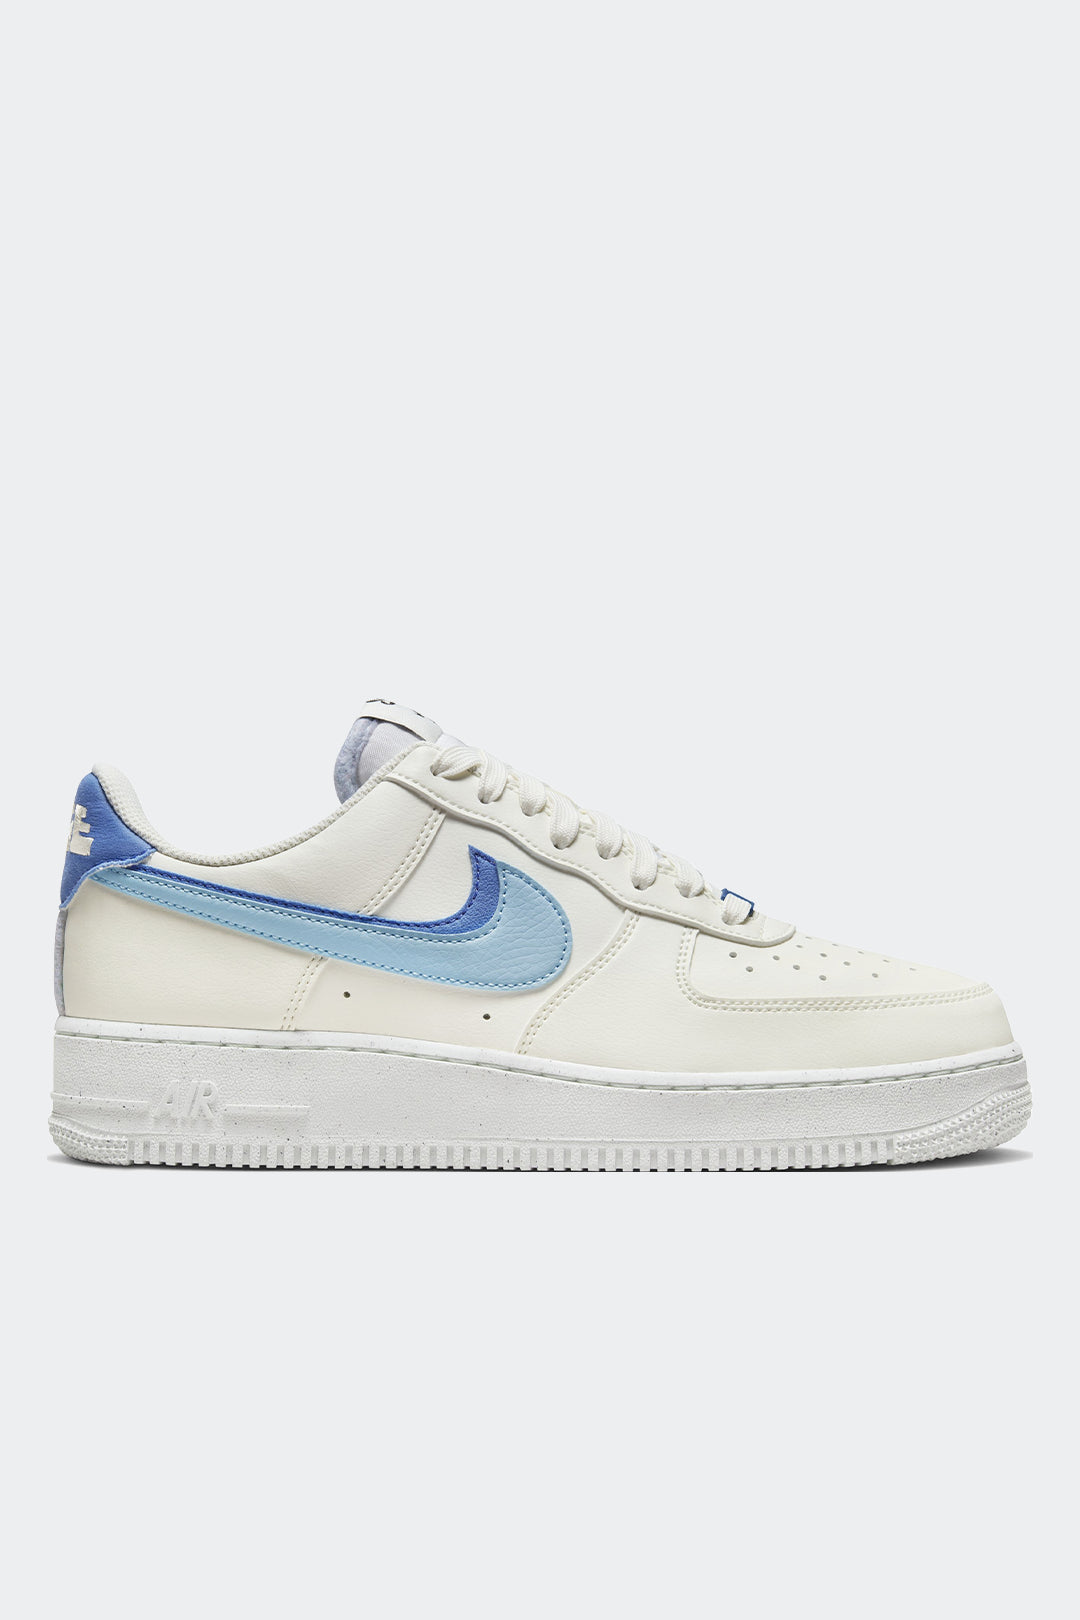 Nike Air Force 1 '07 Lv8 82 Double Swoosh Fa22 | HYPE